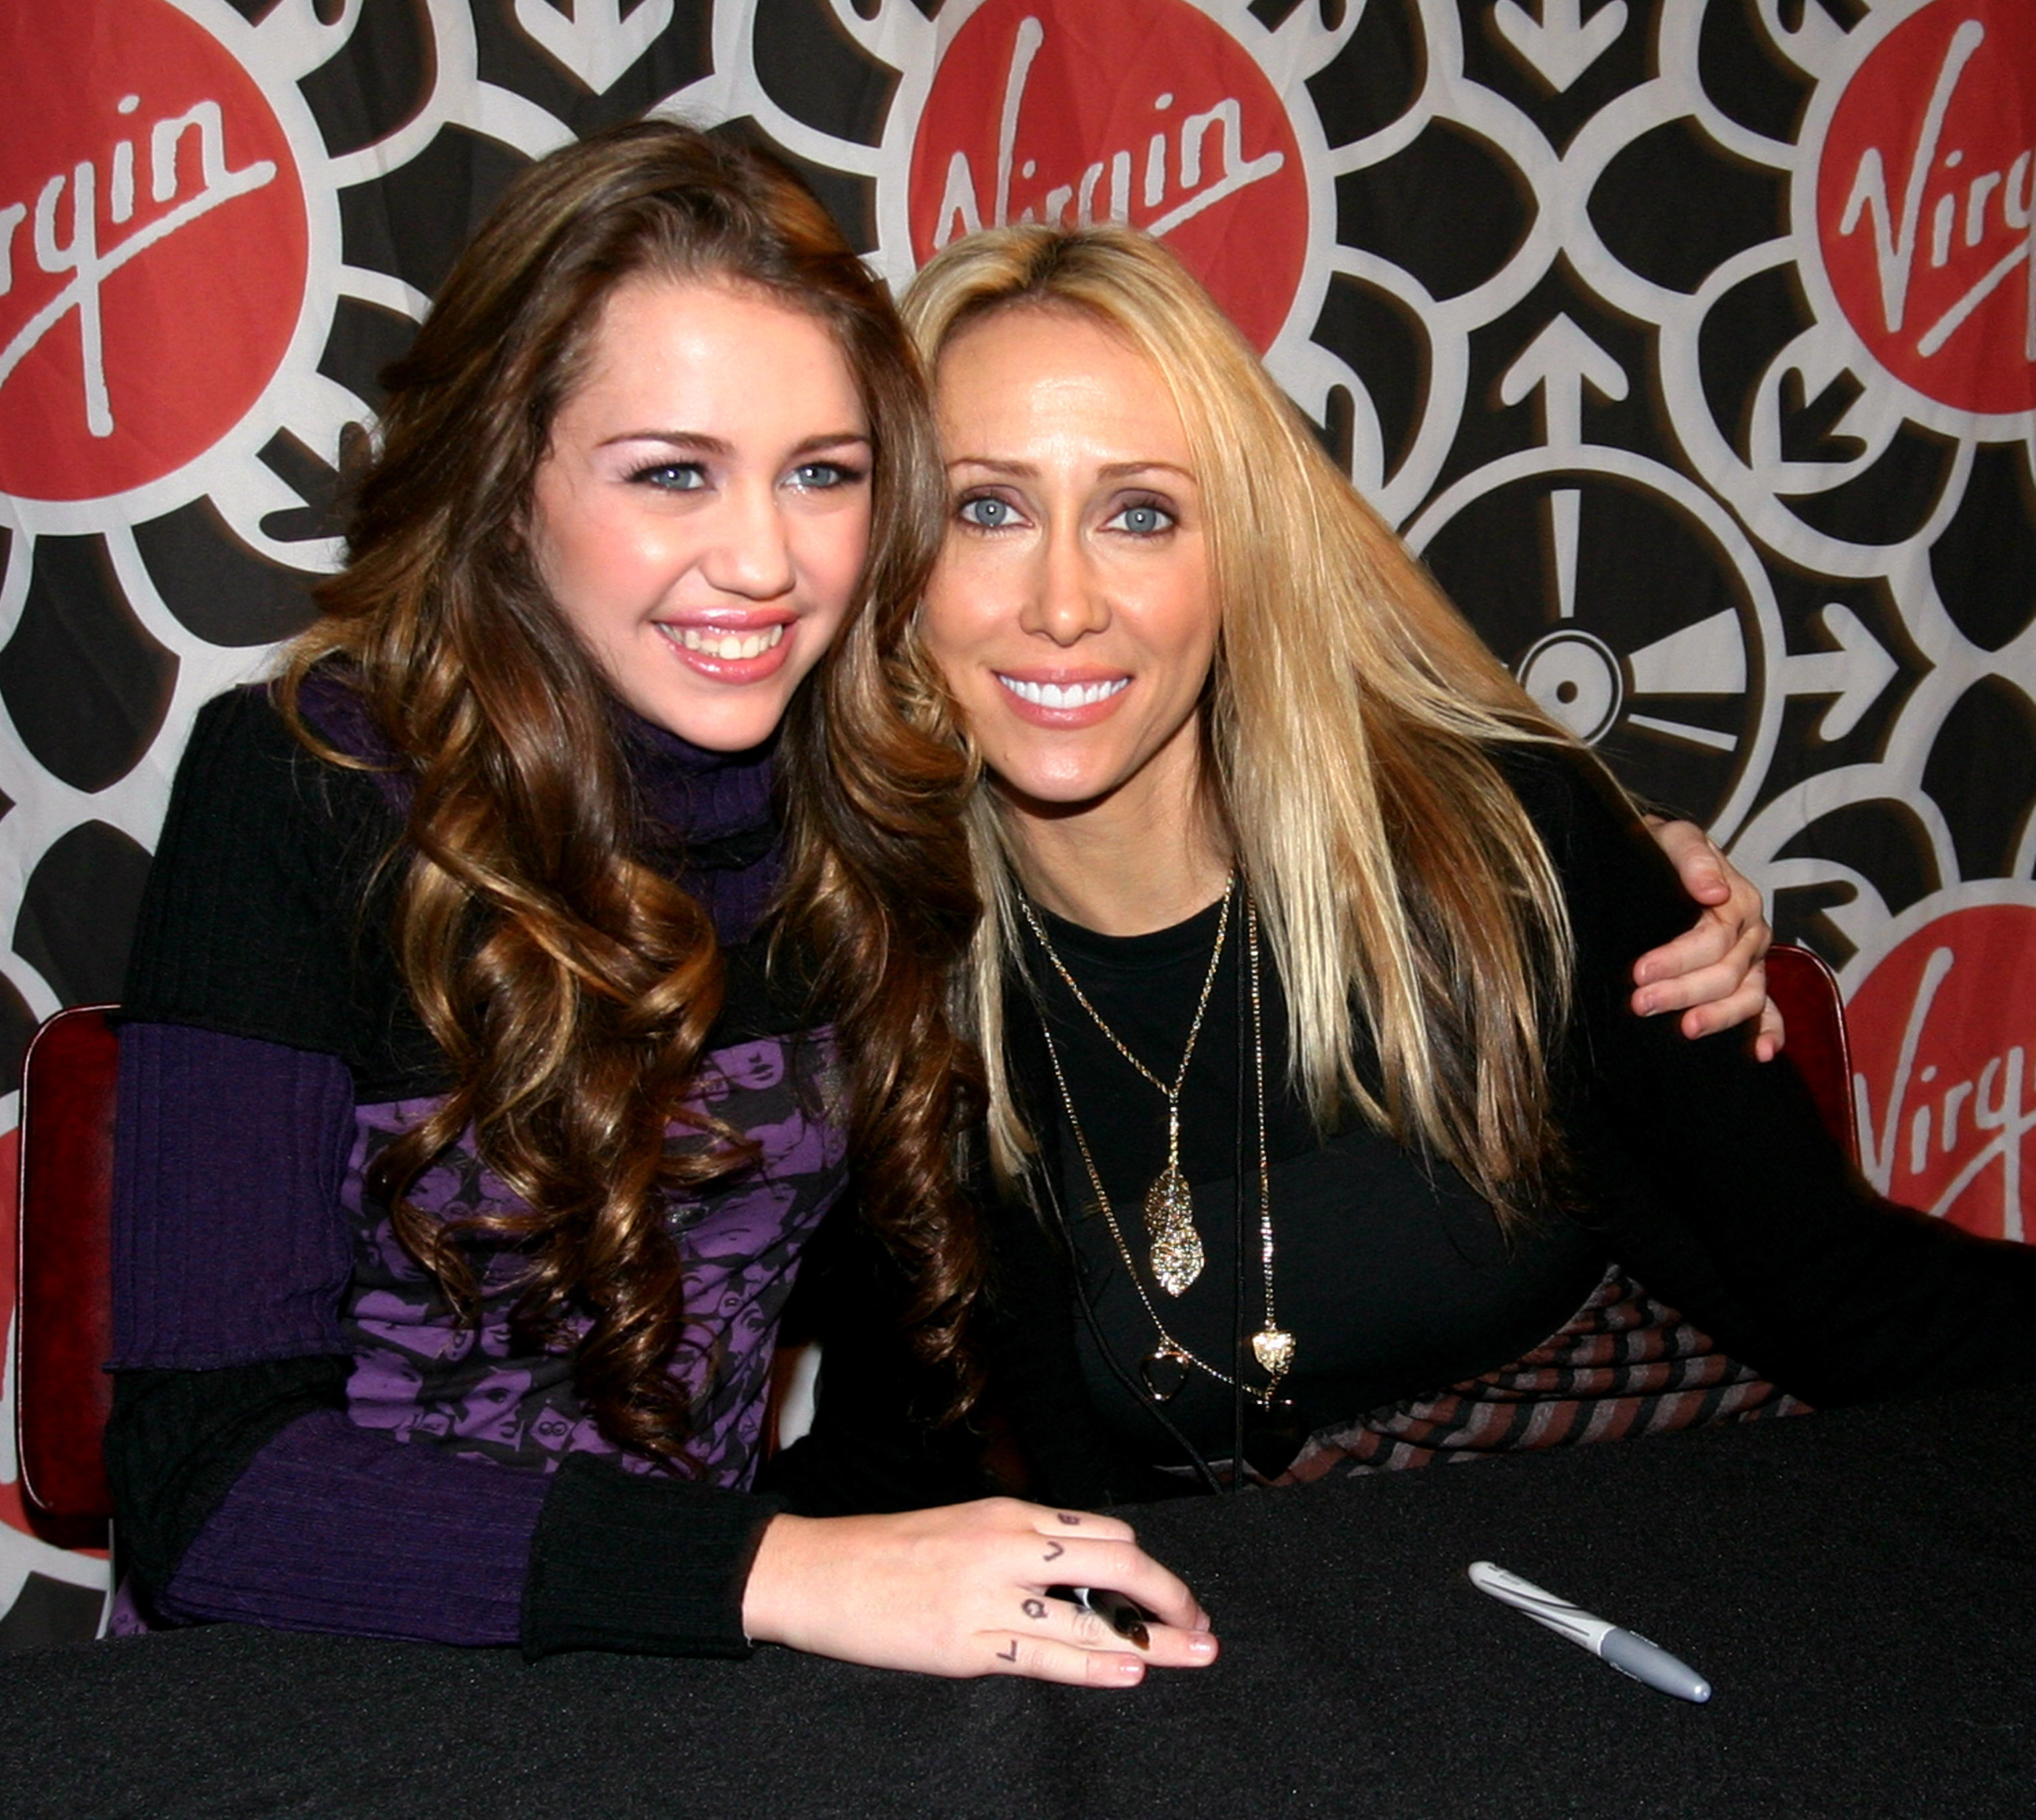 Miley and Tish Cyrus at a table